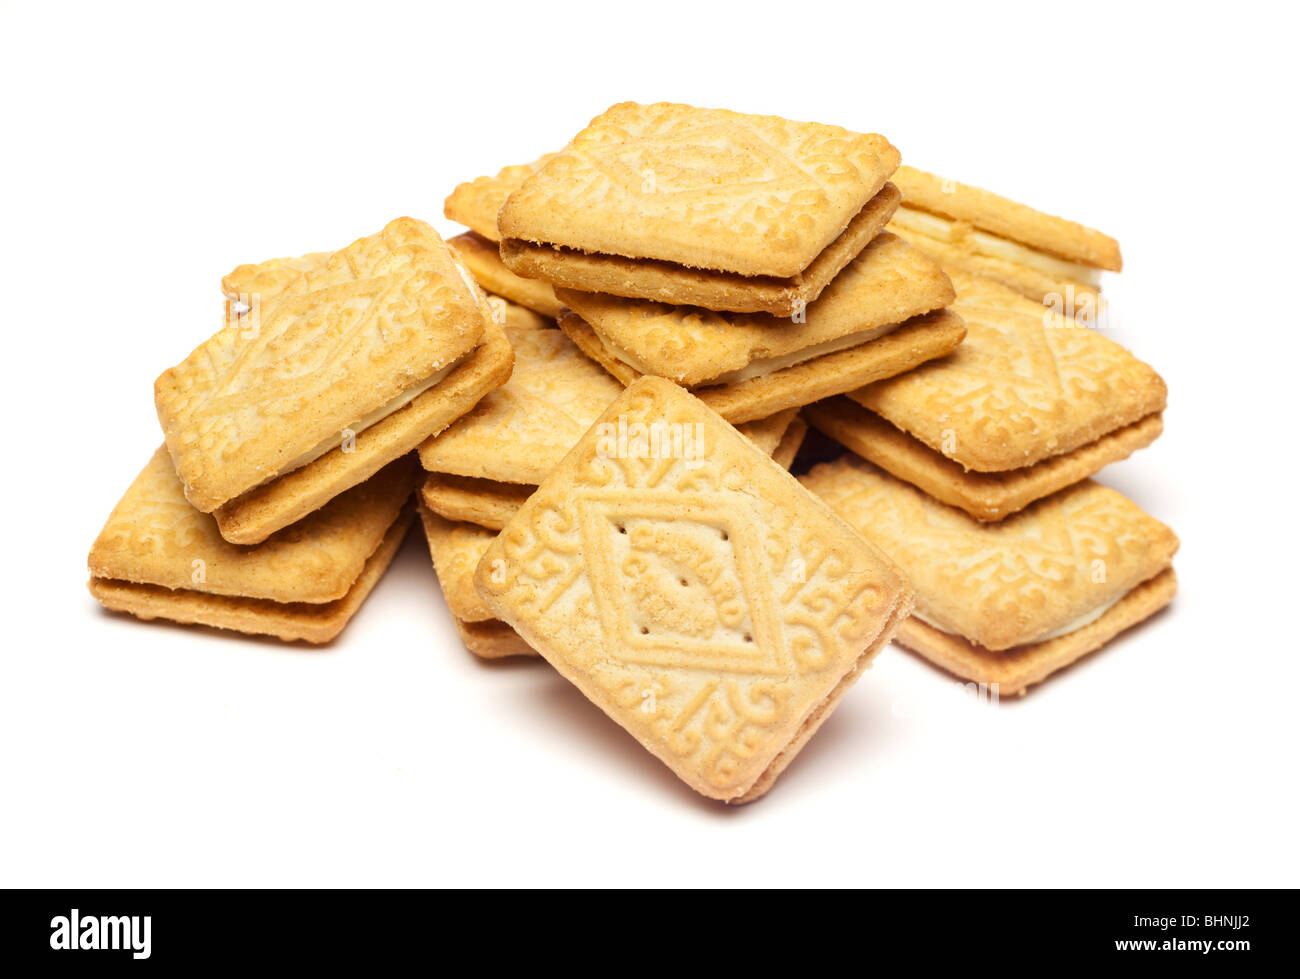 Studio shot of a pile of Custard Cream biscuits cut out isolated on white background Stock Photo